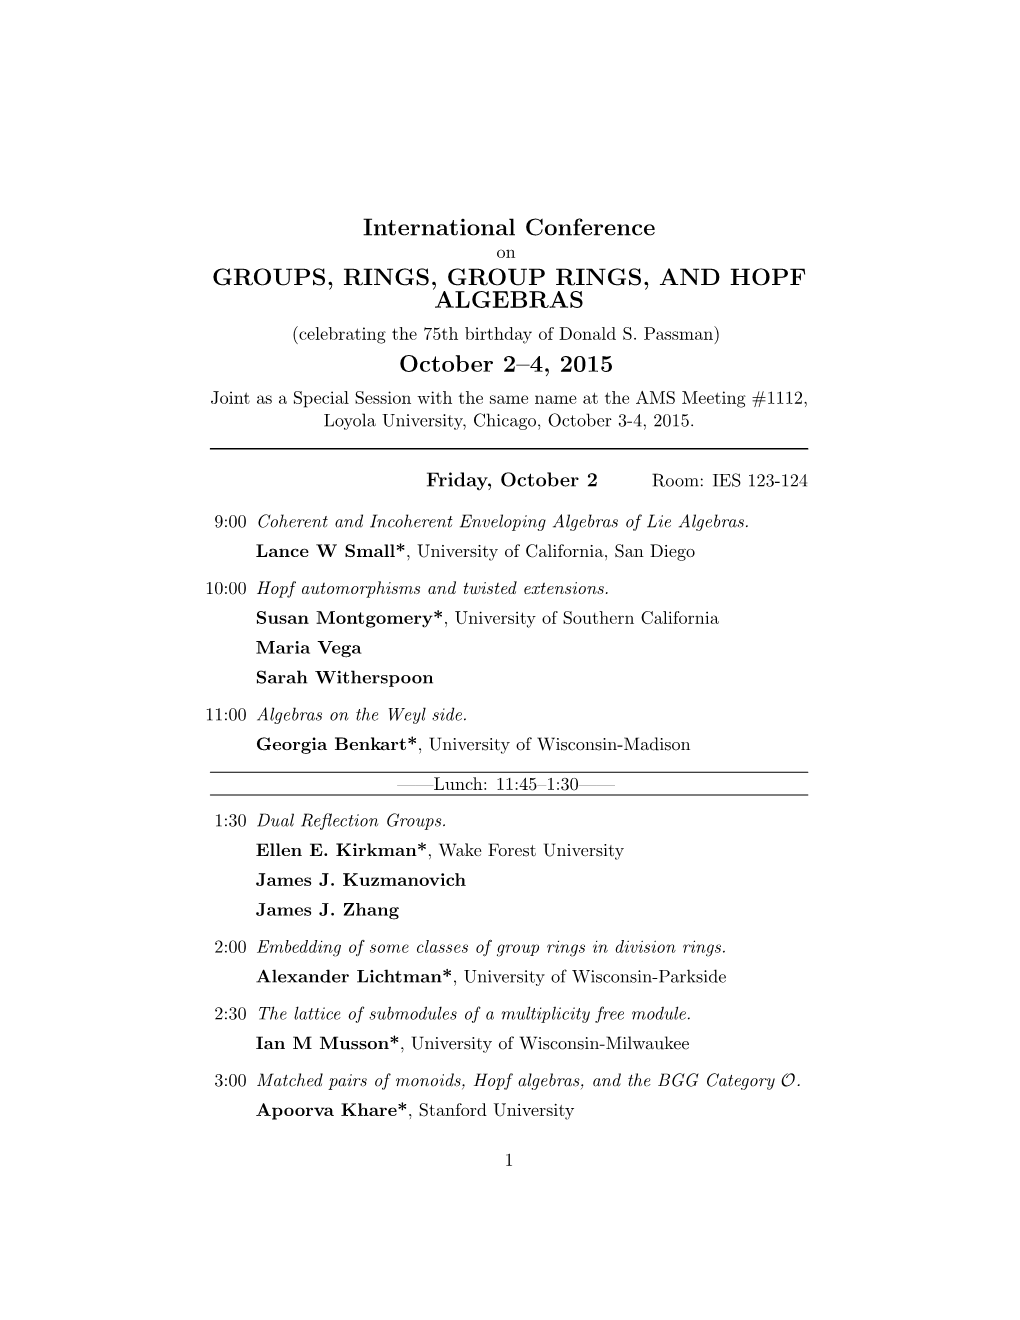 International Conference GROUPS, RINGS, GROUP RINGS, AND